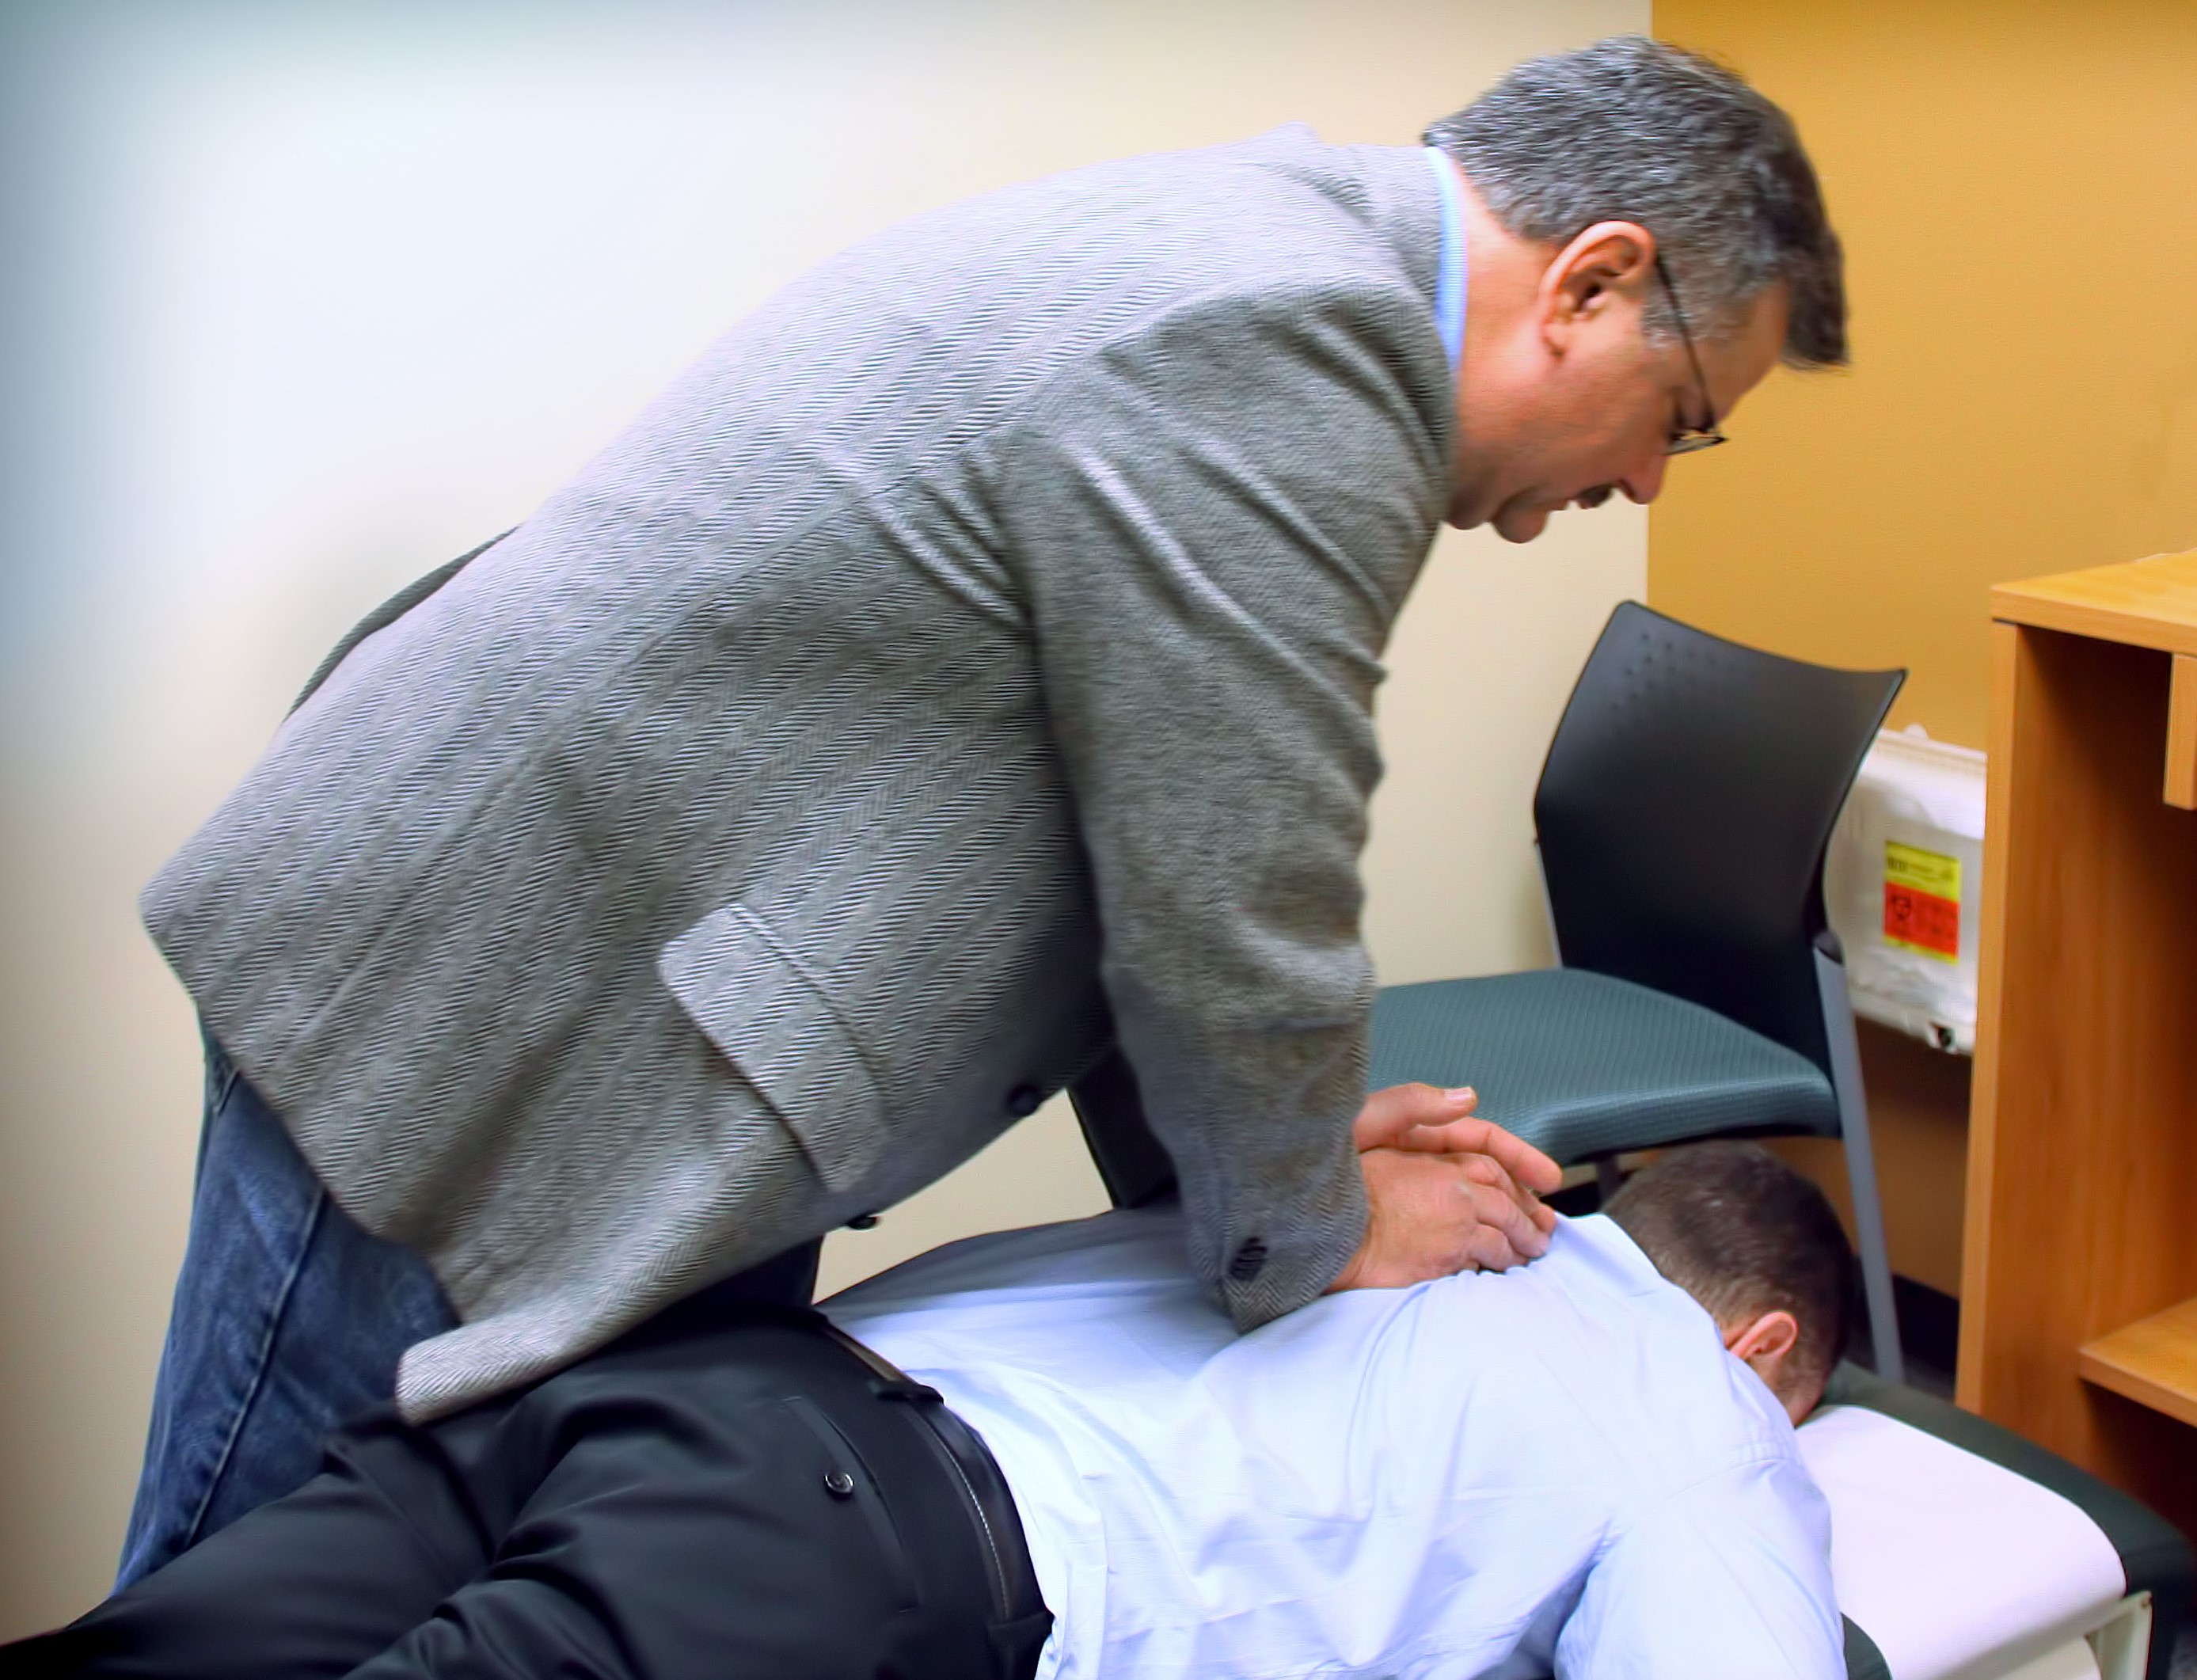 chiropractic doctor in therapy session with his patient